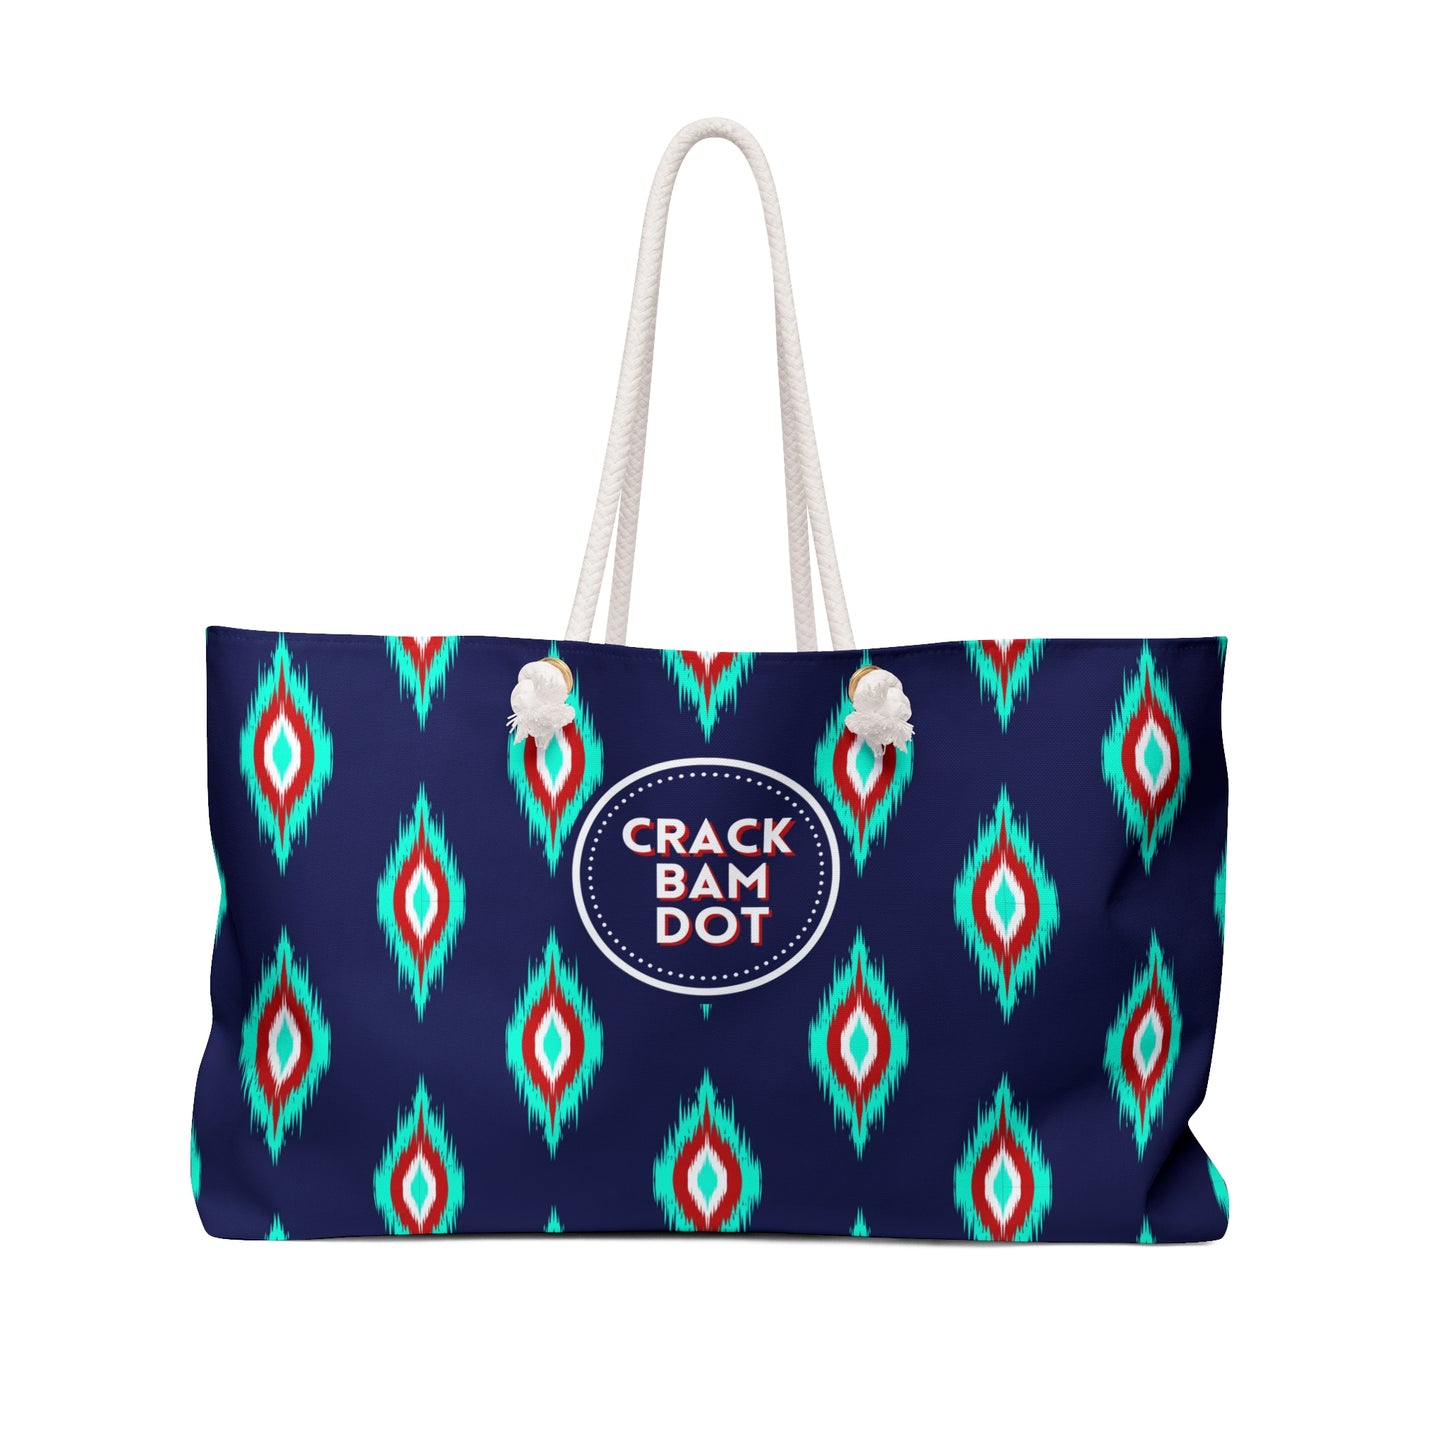 Mahjong Tote Bag. Oversize Carrying Bag to Hold Your Mahjongg Tiles, Mah Jongg Accessories and More. Navy Red IKAT Pattern.